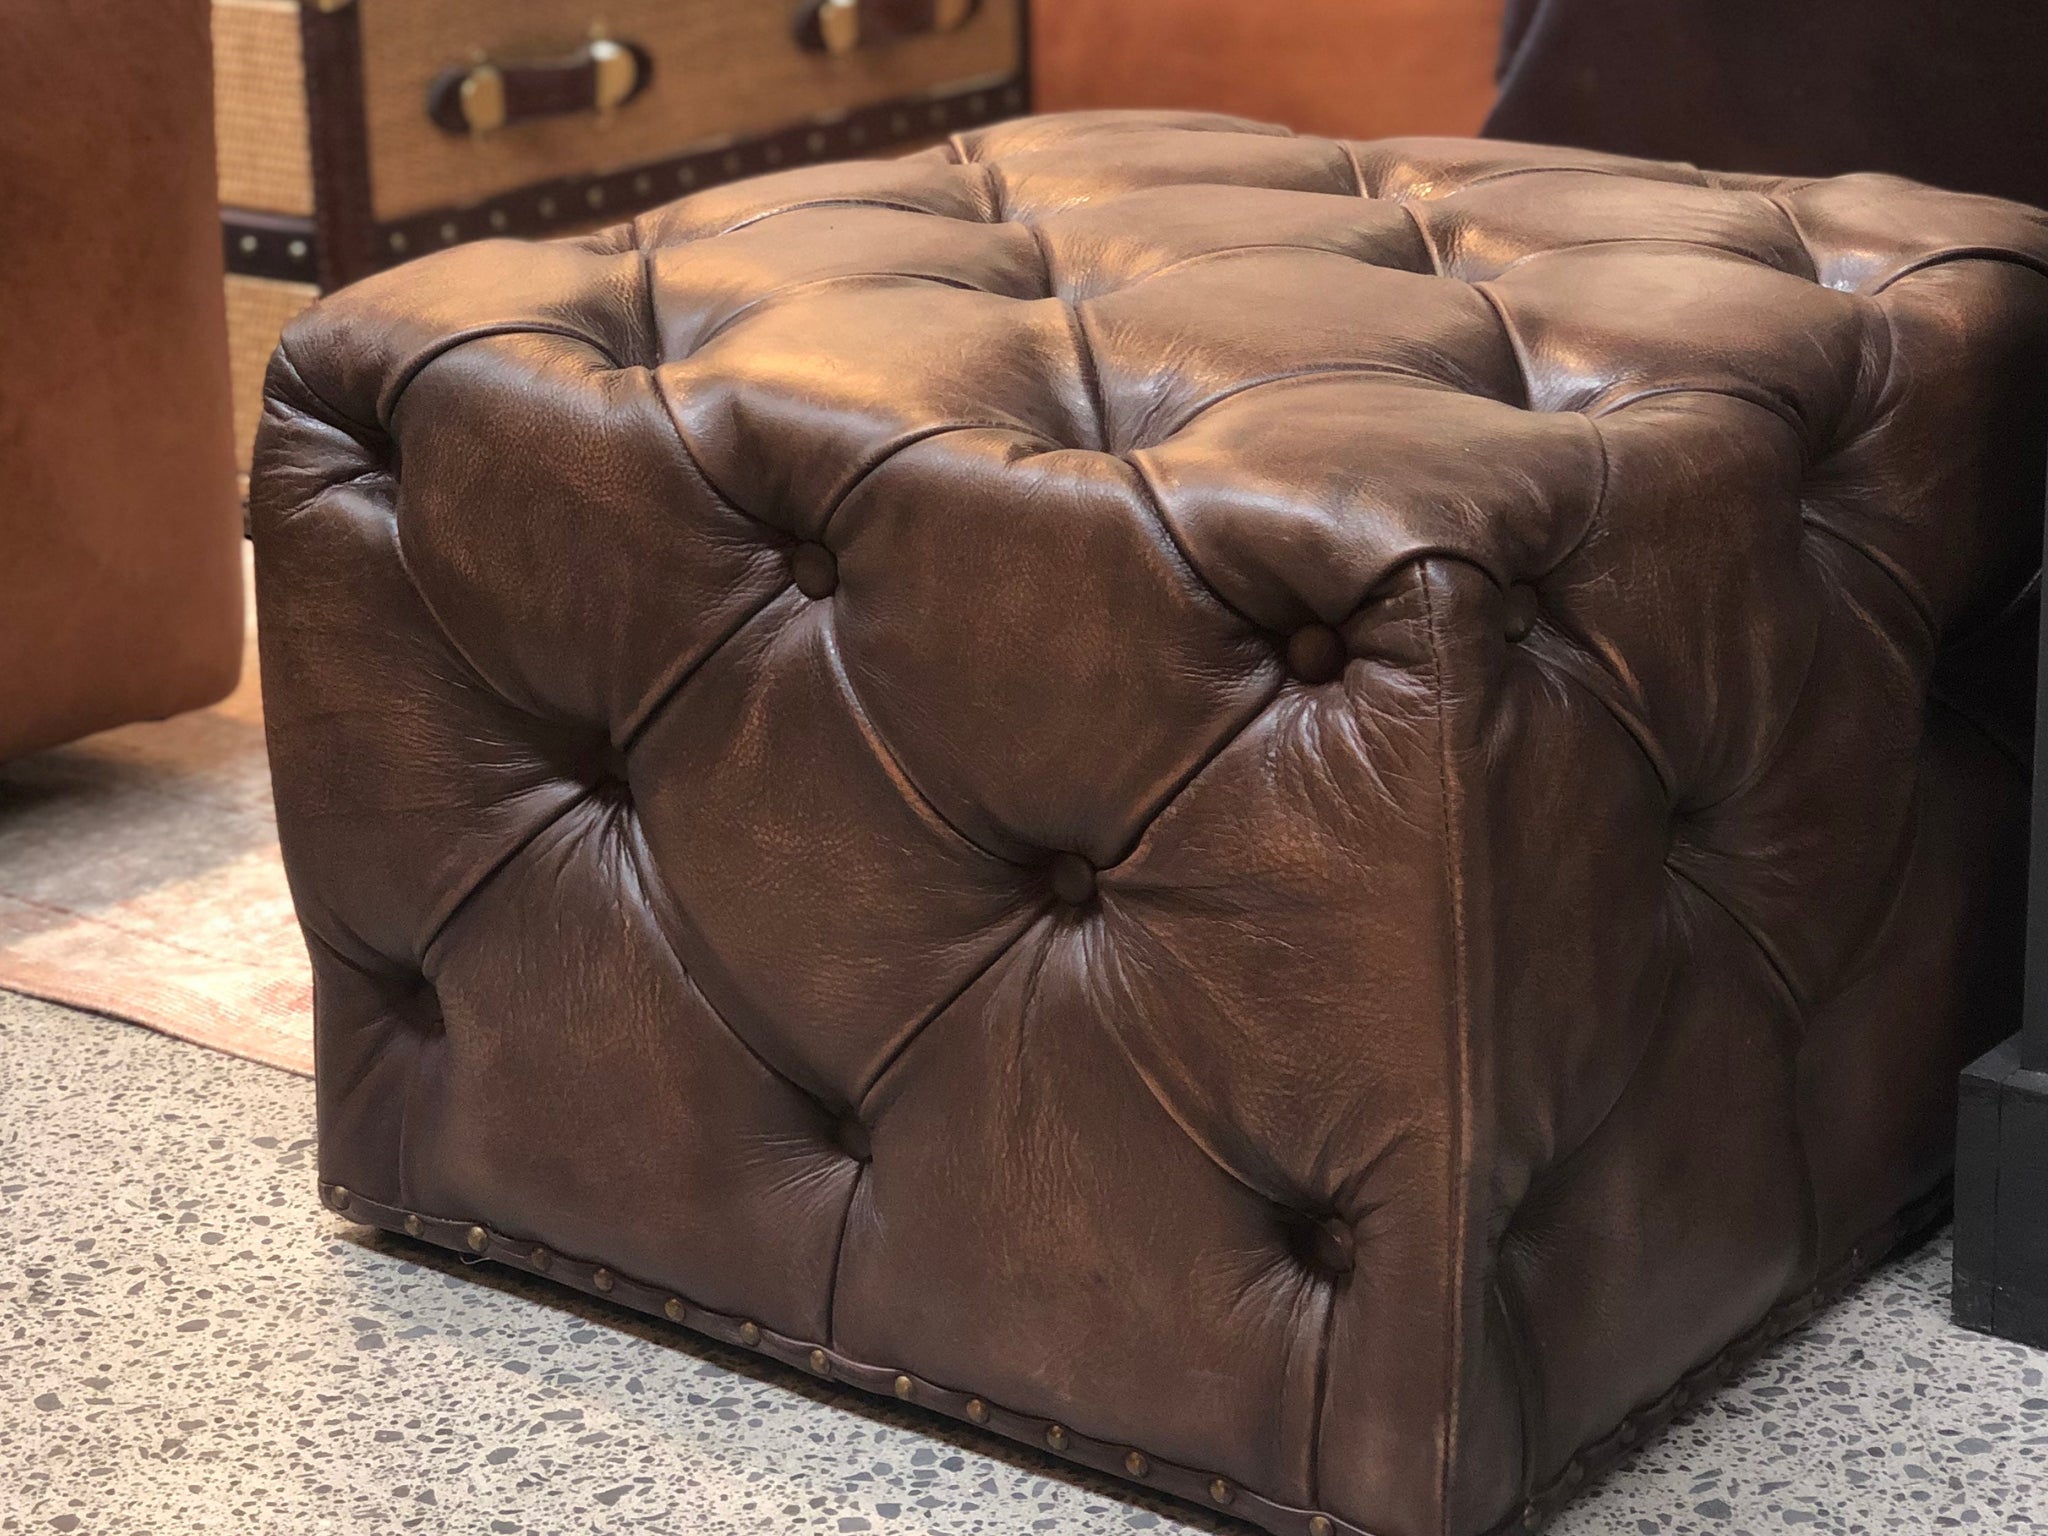 Lord Digsby Square Footstool - Clearance item